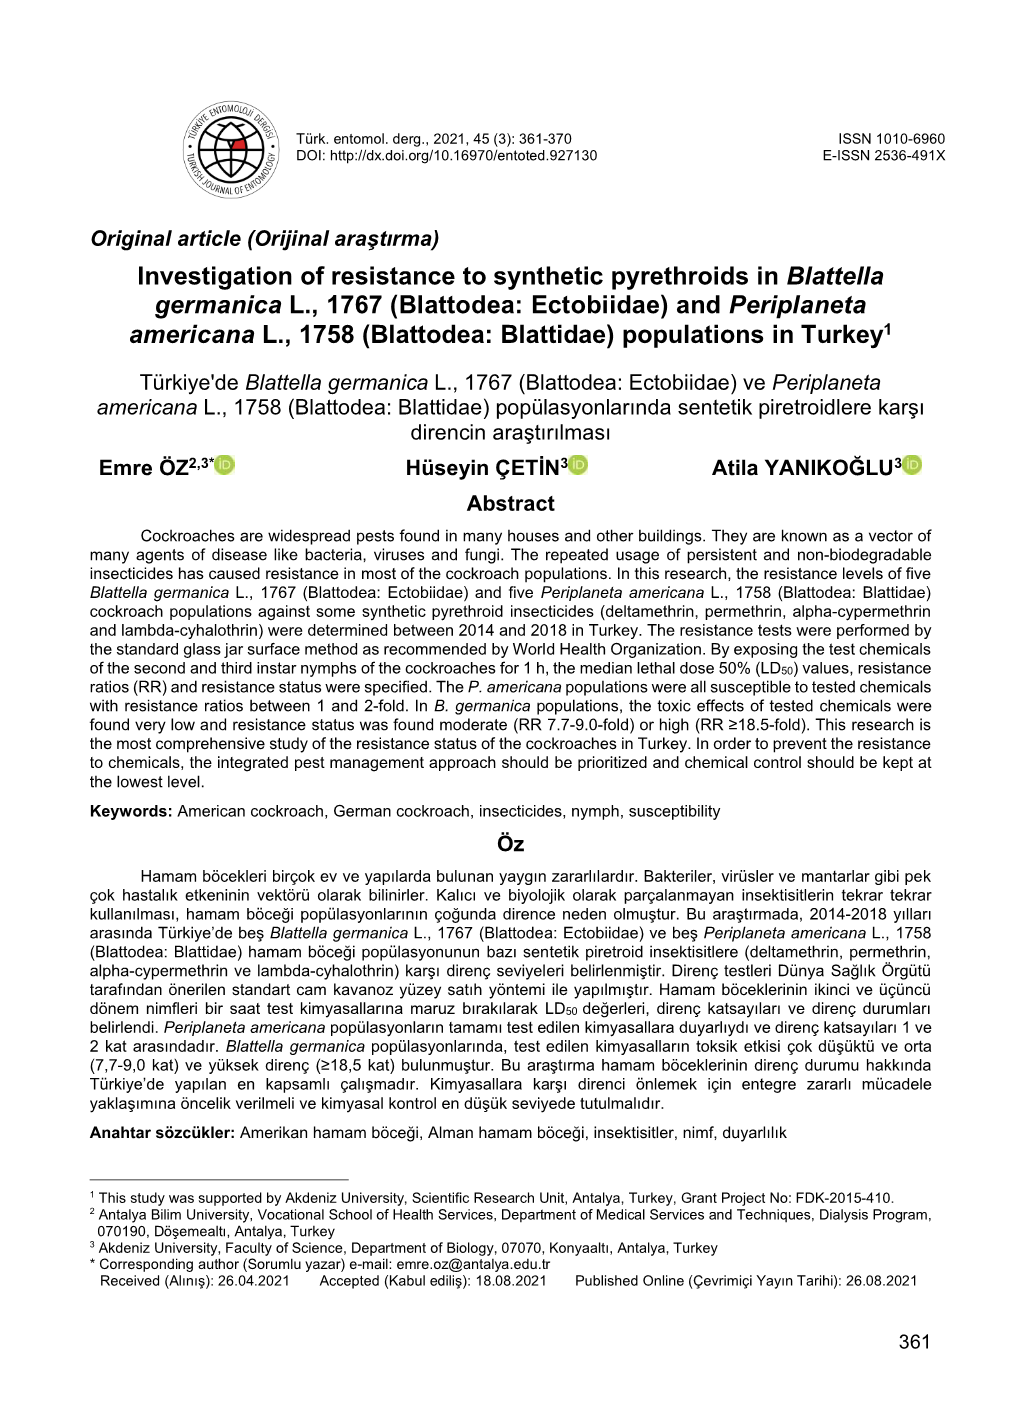 Investigation of Resistance to Synthetic Pyrethroids in Blattella Germanica L